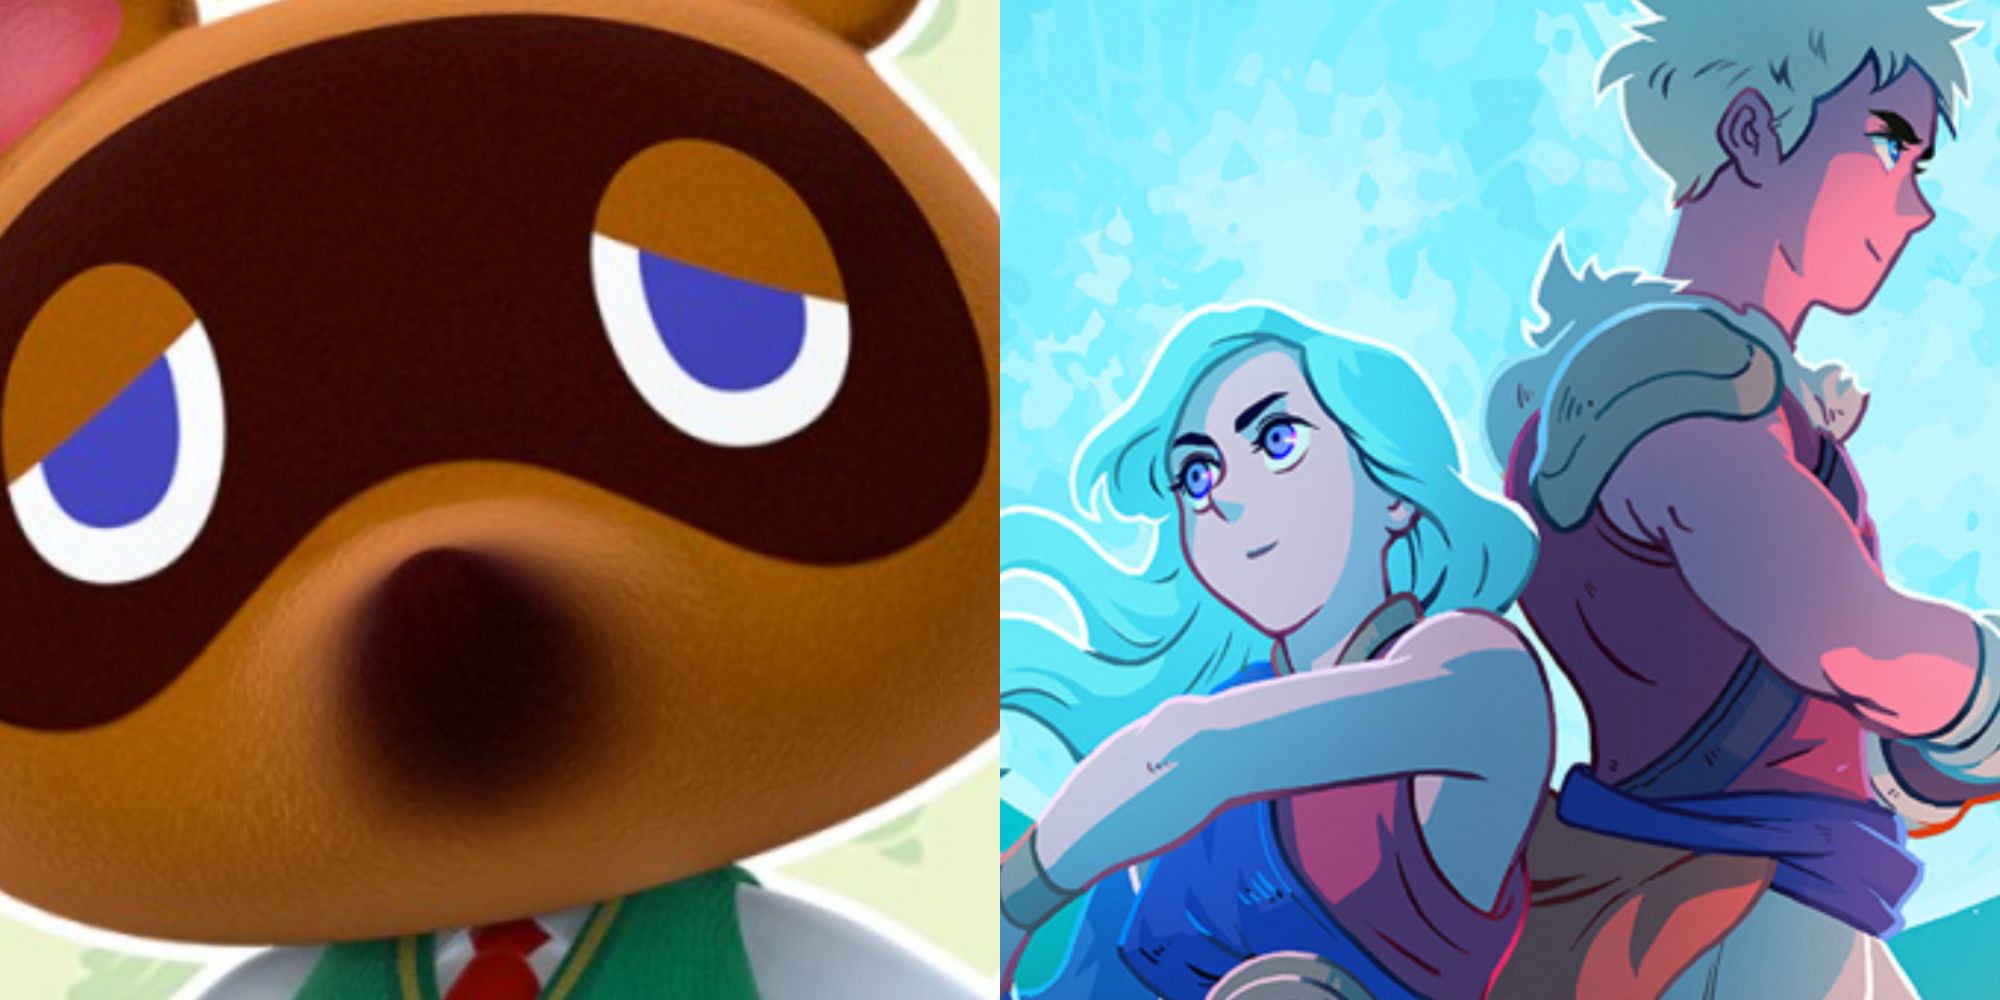 Tom nook stood next to the official poster for Sea of Stars